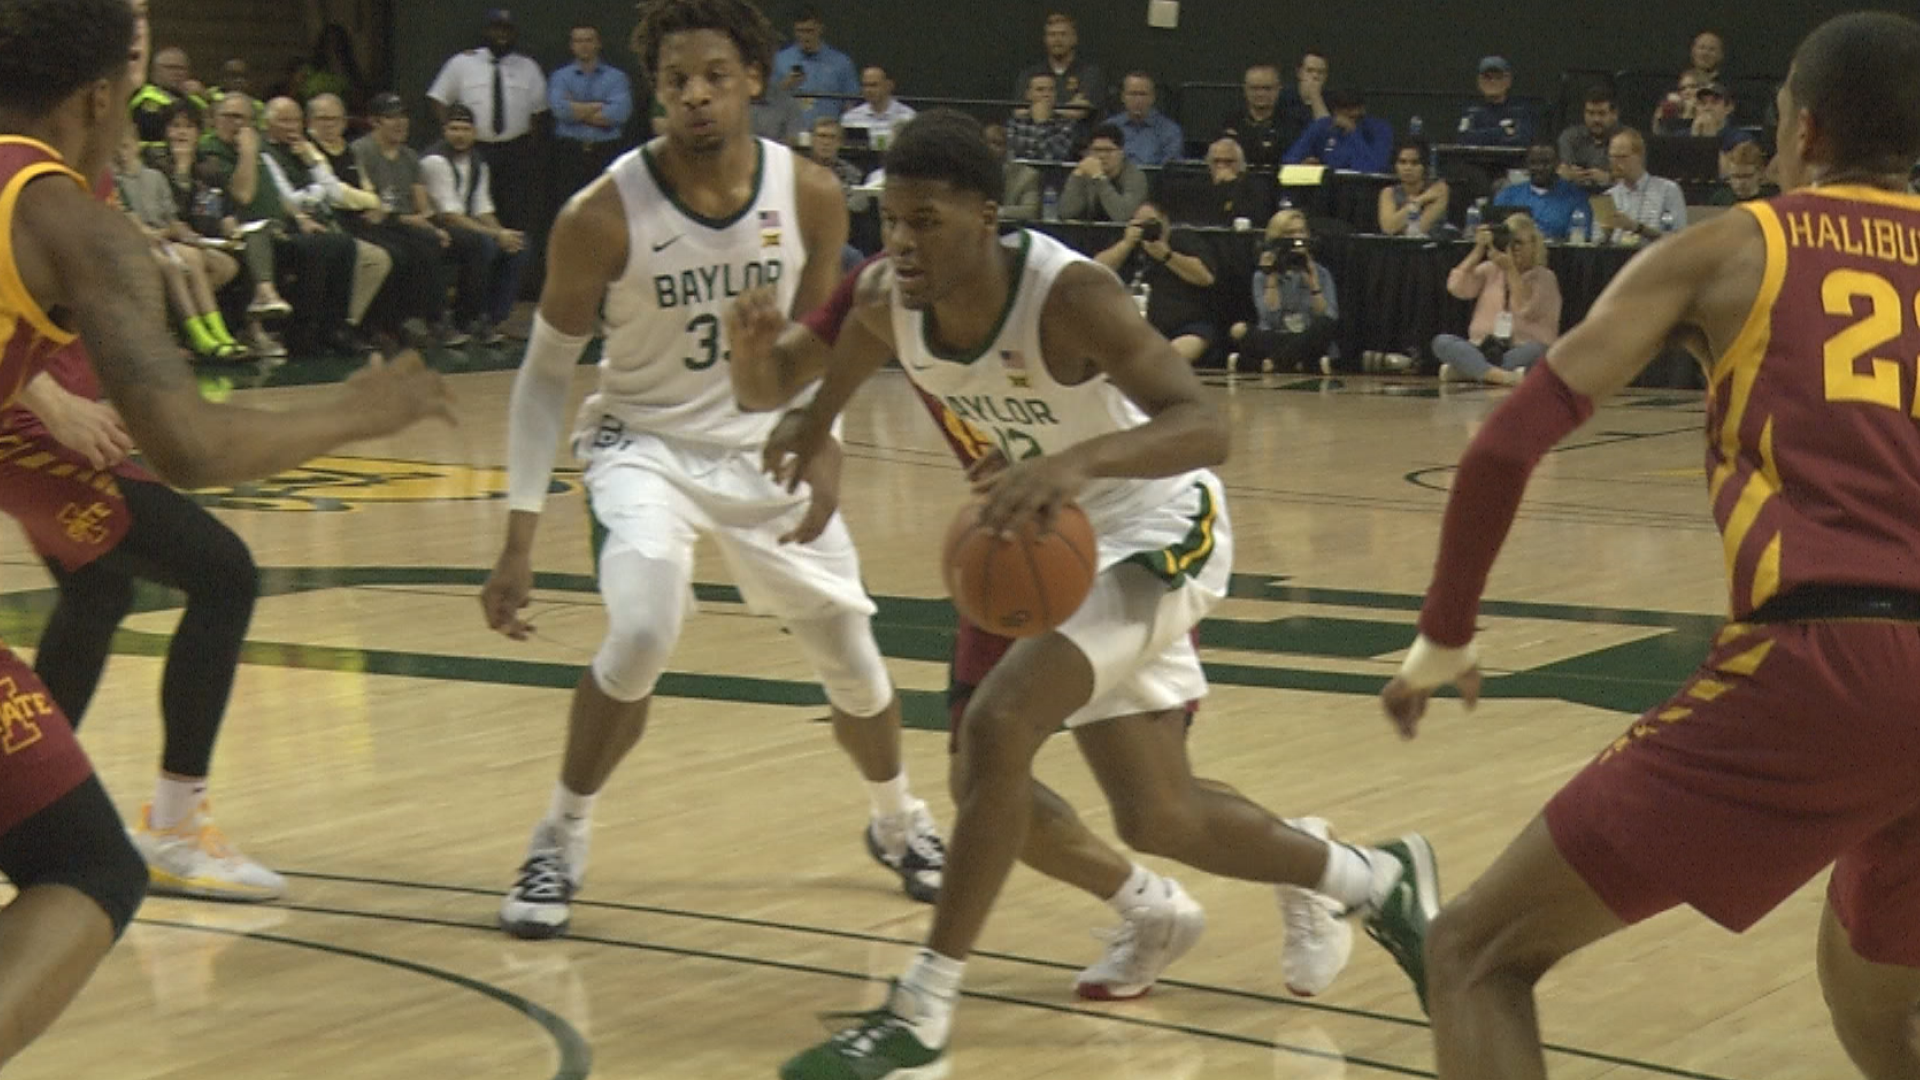 Baylor played their first game as a number one team at home, taking on Oklahoma.